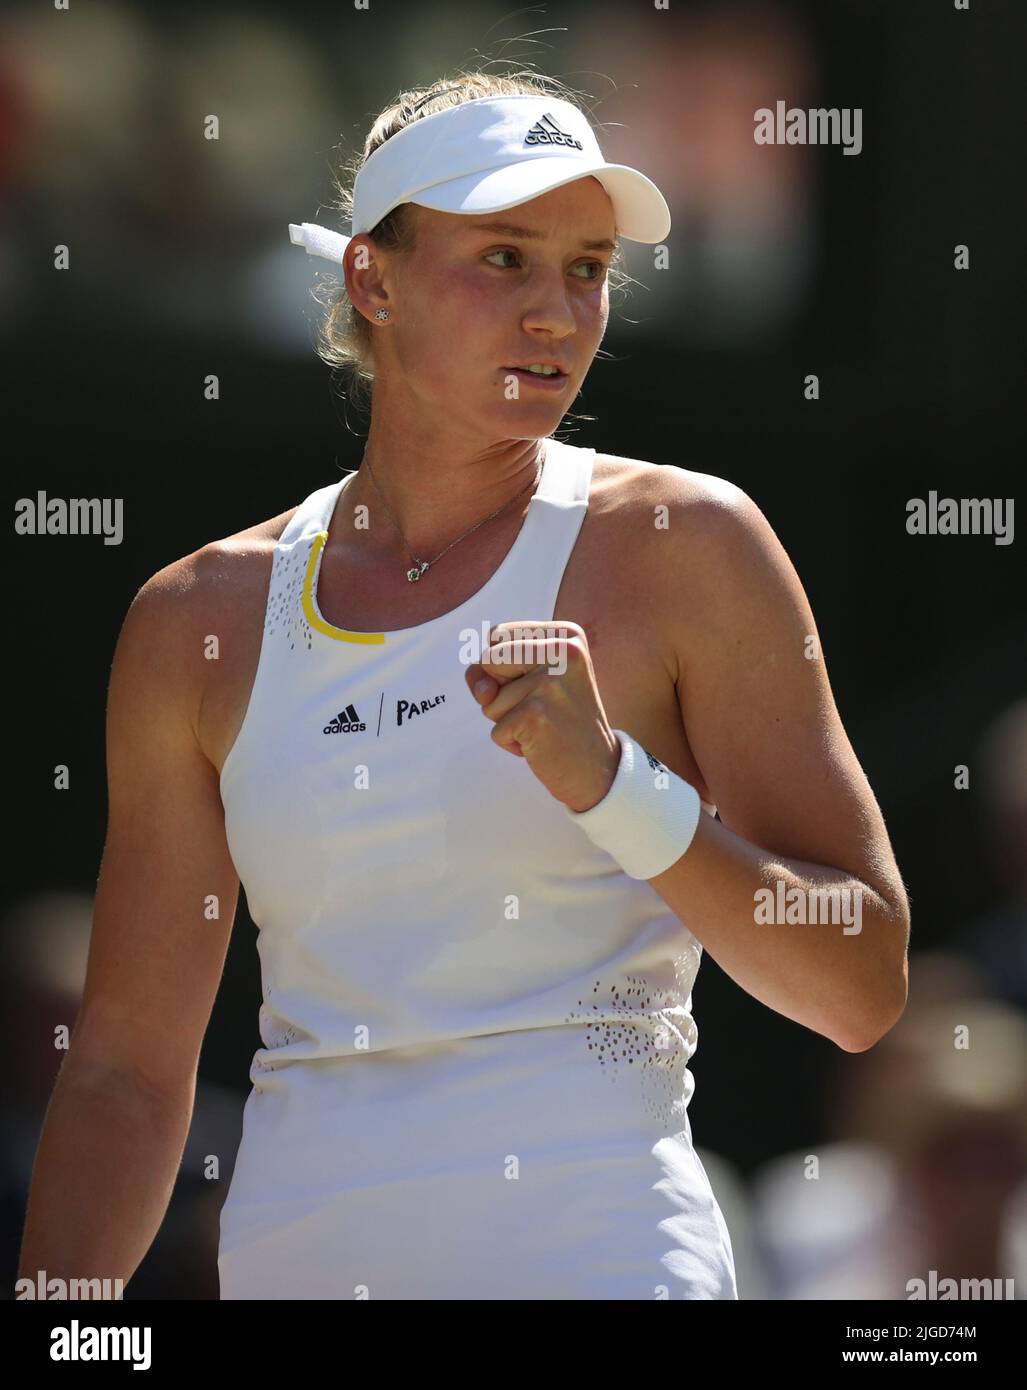 London, Britain. 9th July, 2022. Elena Rybakina of Kazakhstan reacts during  the women's singles final match against Ons Jabeur of Tunisia at Wimbledon  Tennis Championship in London, Britain, on July 9, 2022.